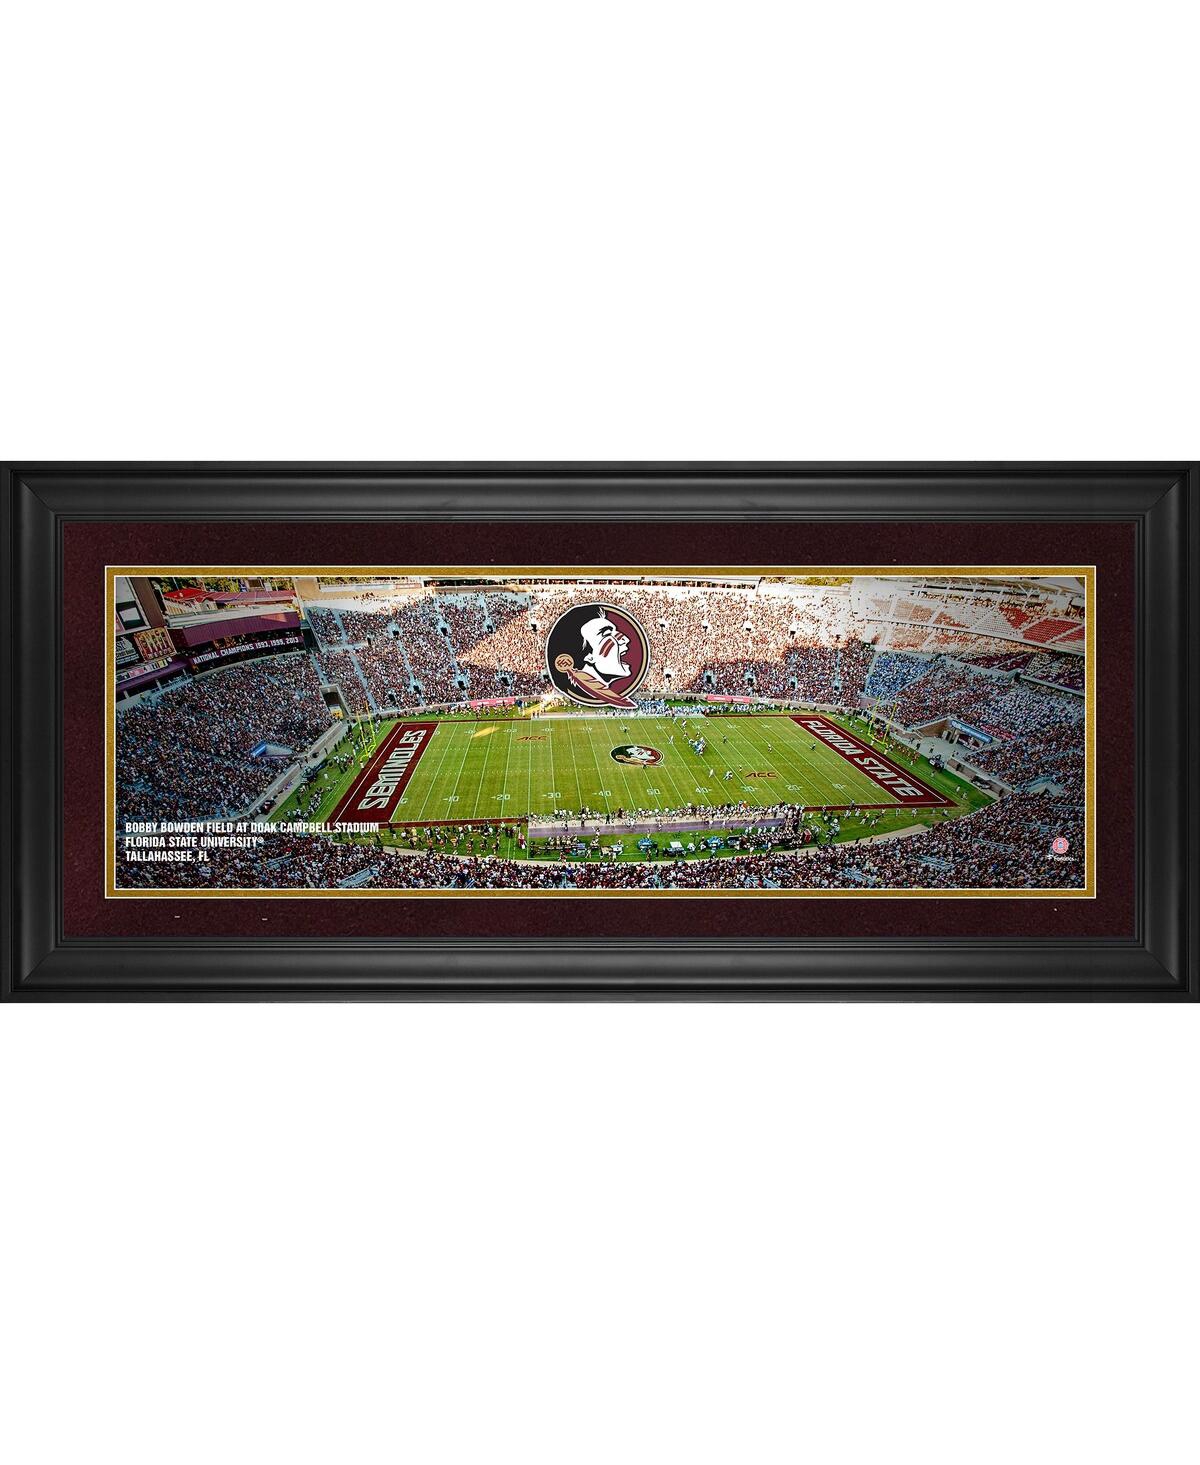 Fanatics Authentic Florida State Seminoles Framed 10" X 30" Bobby Bowden Field At Doak Campbell Stadium Panoramic Photo In Multi